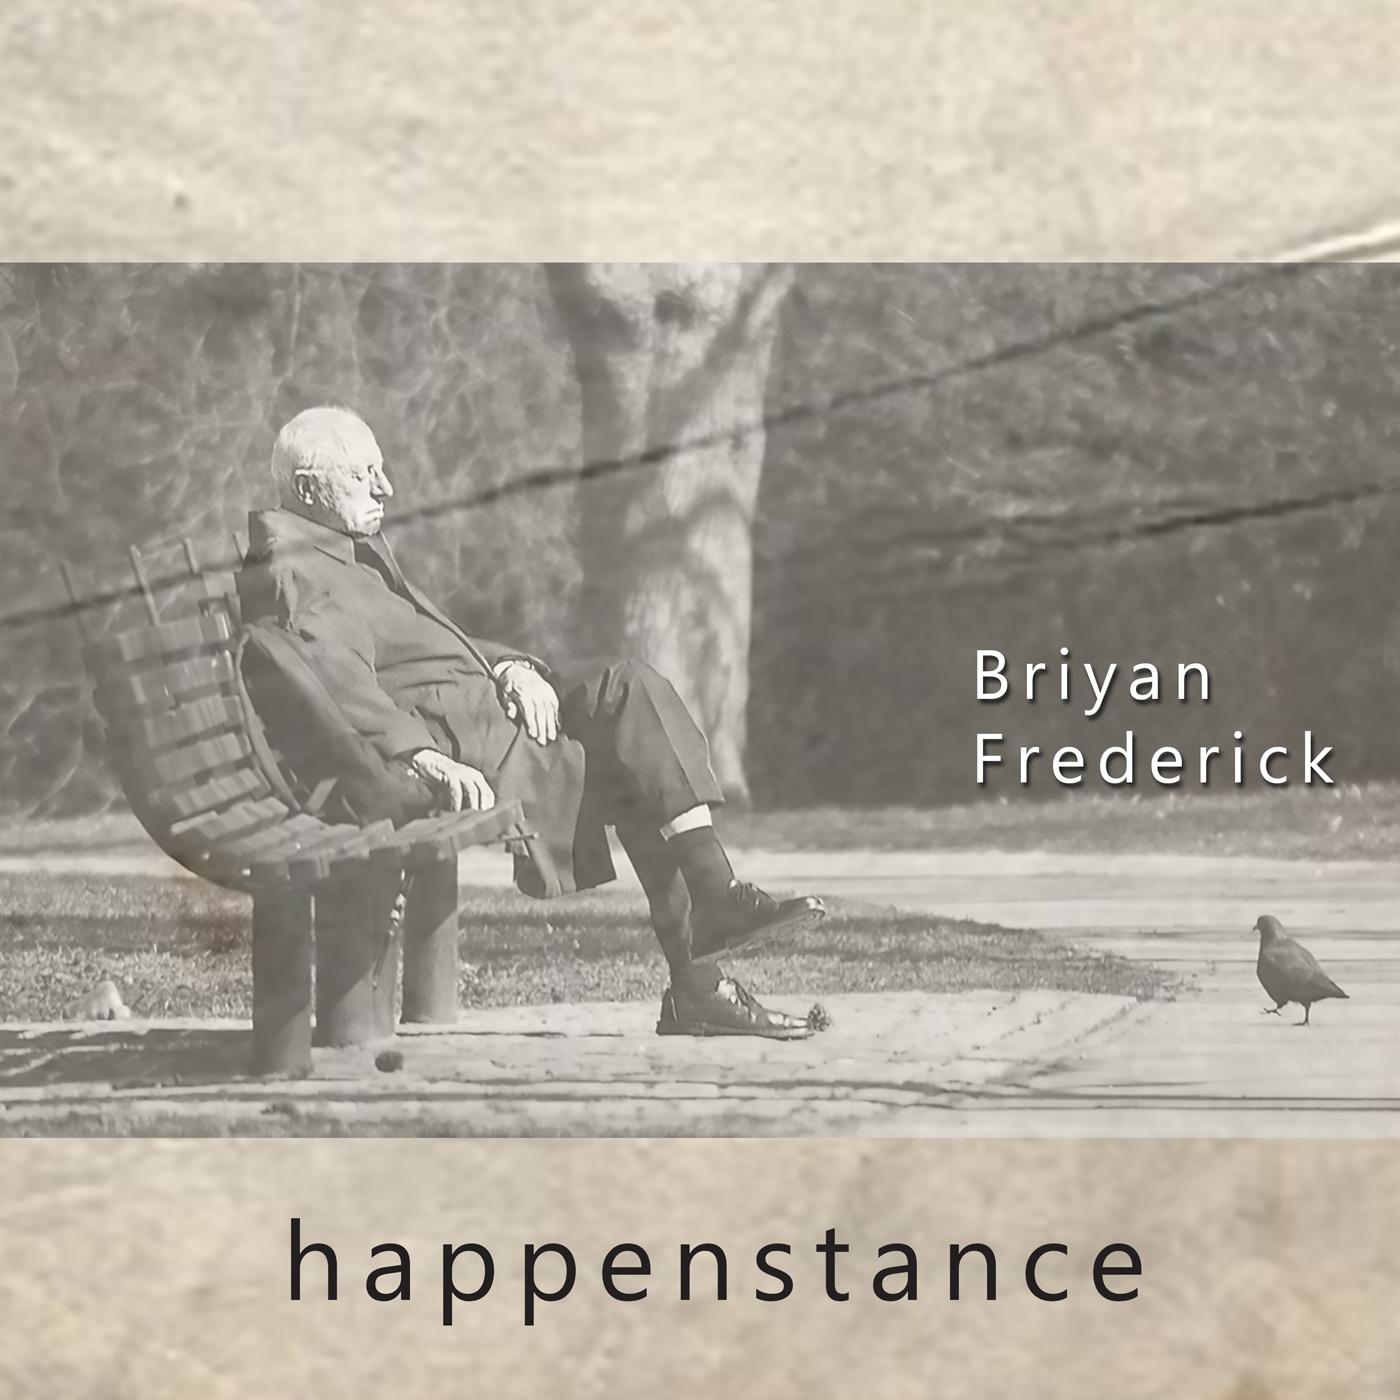 New Release, happenstance by Briyan Frederick